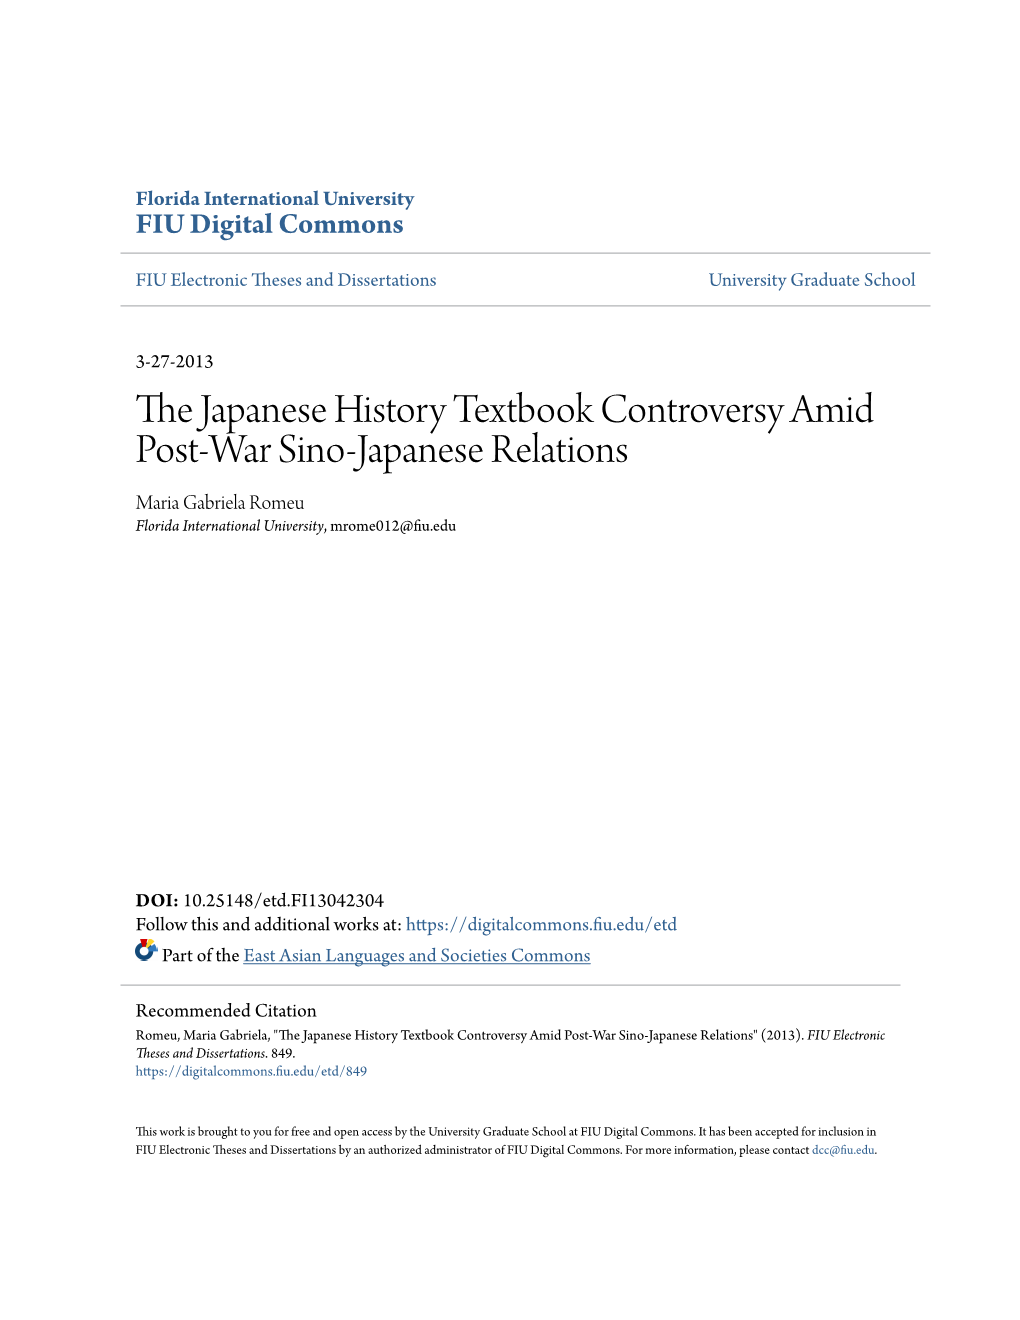 The Japanese History Textbook Controversy Amid Post-War Sino